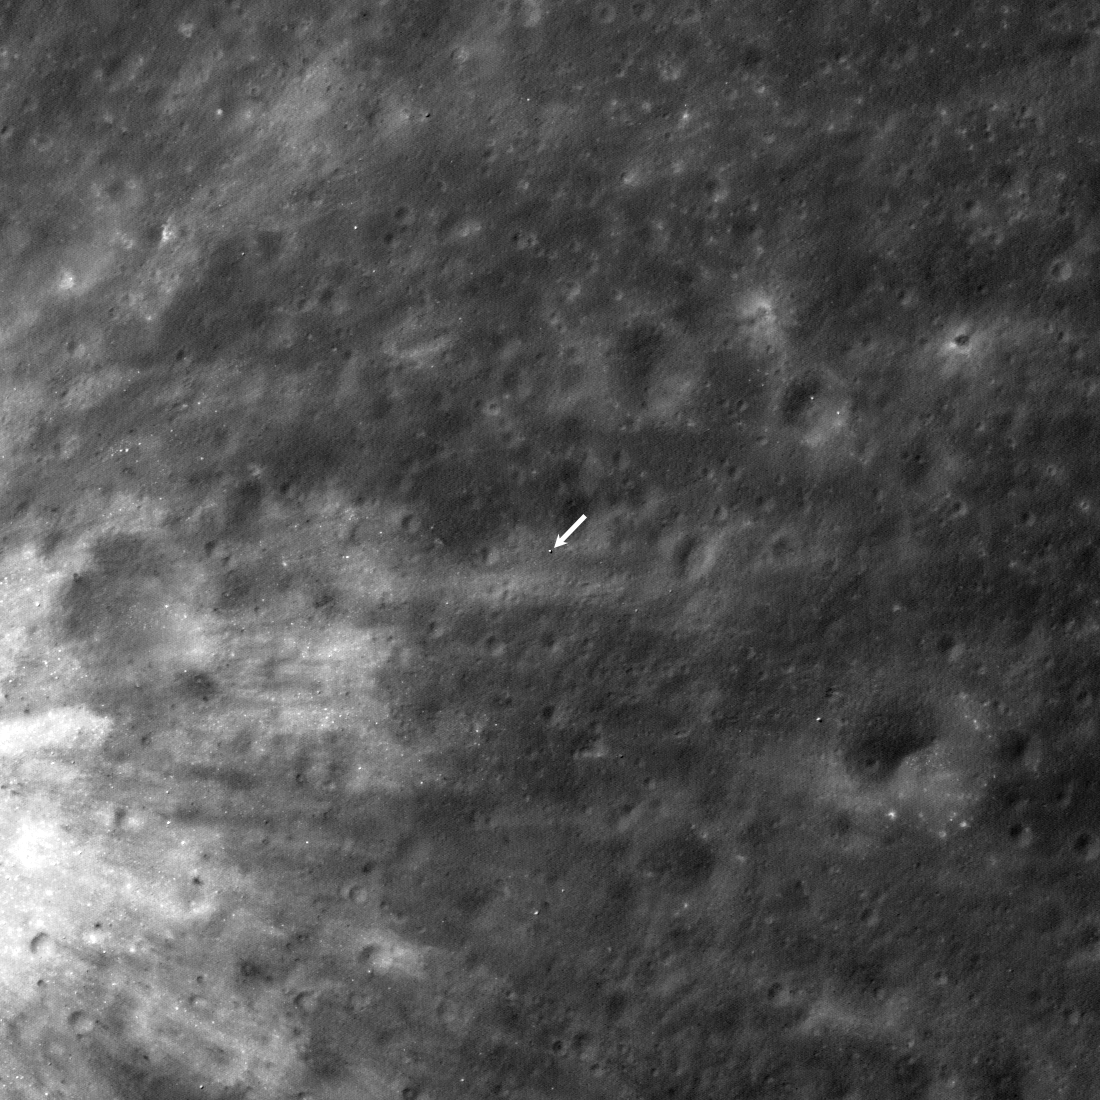 A black and white image of the surface of the moon taken from NASA's LRO showing a white dot that is JAXA's SLIM lander.